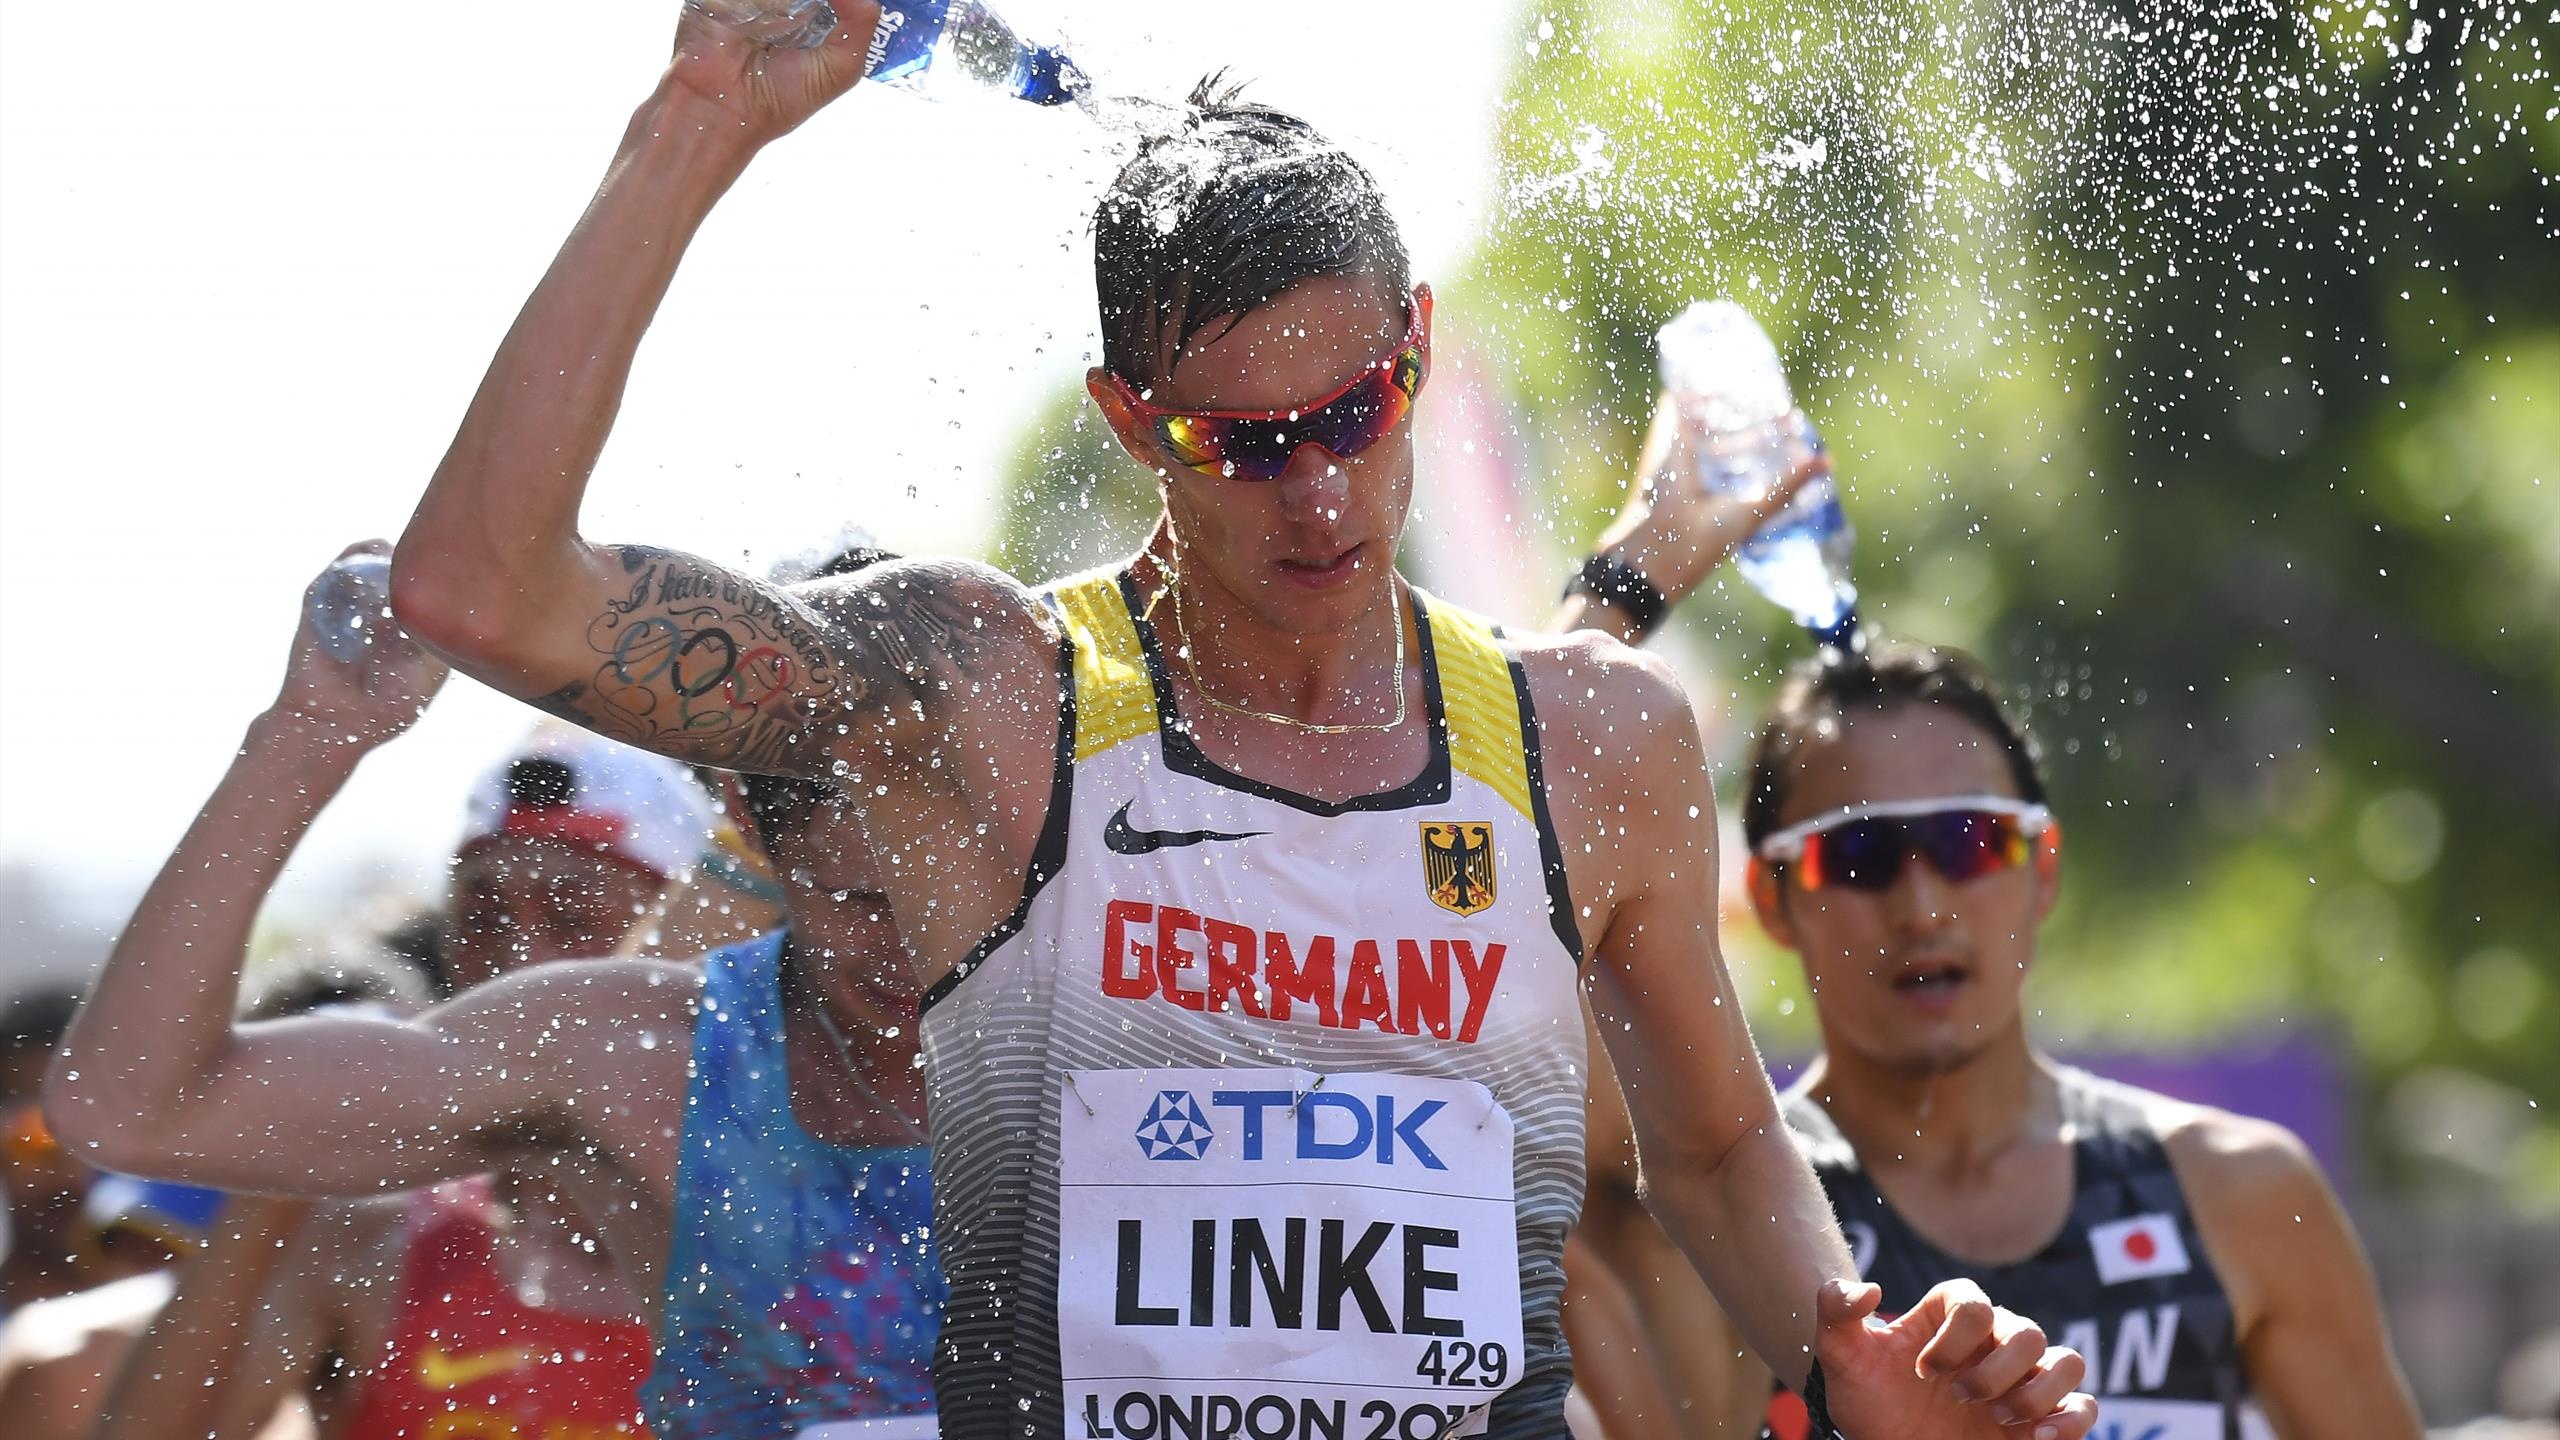 Racewalking: Christopher Linke, The 50 km event at the 2012 Summer Olympics athlete. 2560x1440 HD Wallpaper.